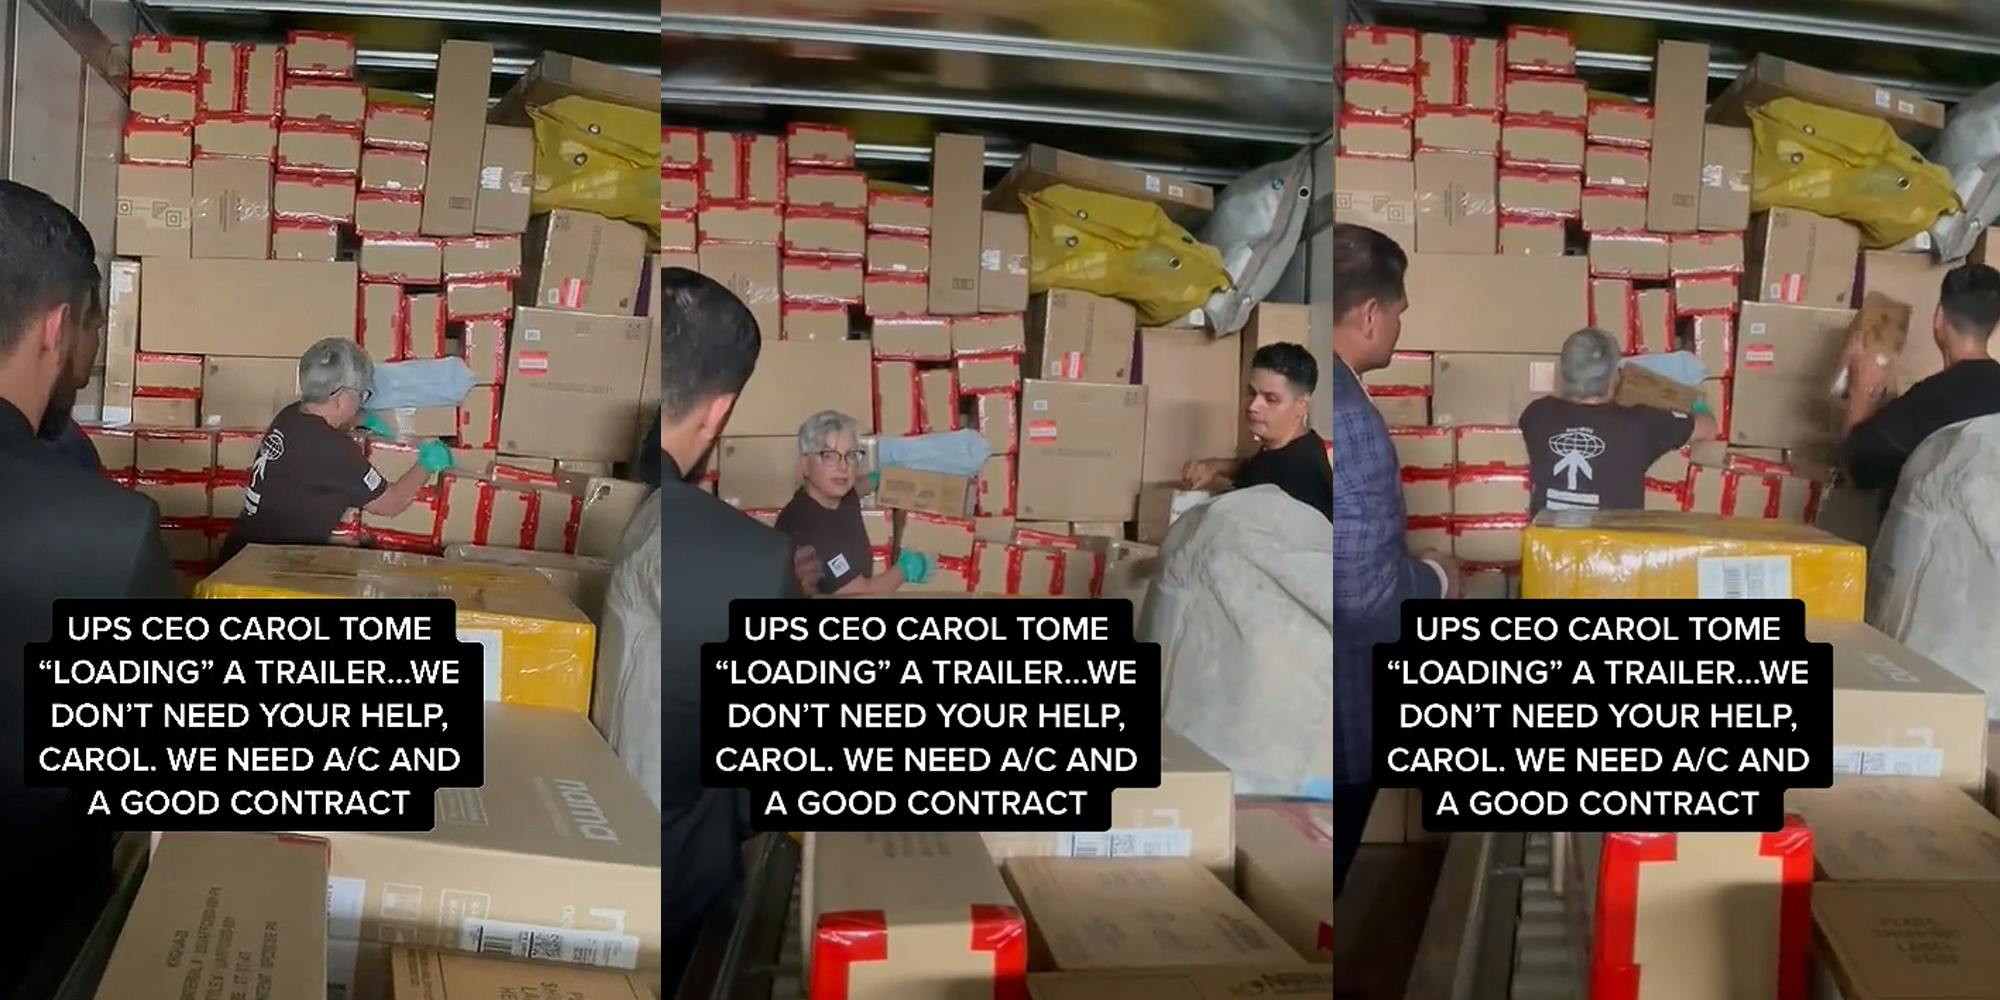 UPS workers loading trailer with CEO caption "UPS CEO CAROL TOME "LOADING" A TRAILER... WE DON'T NEED YOUR HELP, CAROL. WE NEED A/C AND A GOOD CONTRACT" (l) UPS workers loading trailer with CEO caption "UPS CEO CAROL TOME "LOADING" A TRAILER... WE DON'T NEED YOUR HELP, CAROL. WE NEED A/C AND A GOOD CONTRACT" (c) UPS workers loading trailer with CEO caption "UPS CEO CAROL TOME "LOADING" A TRAILER... WE DON'T NEED YOUR HELP, CAROL. WE NEED A/C AND A GOOD CONTRACT" (r)